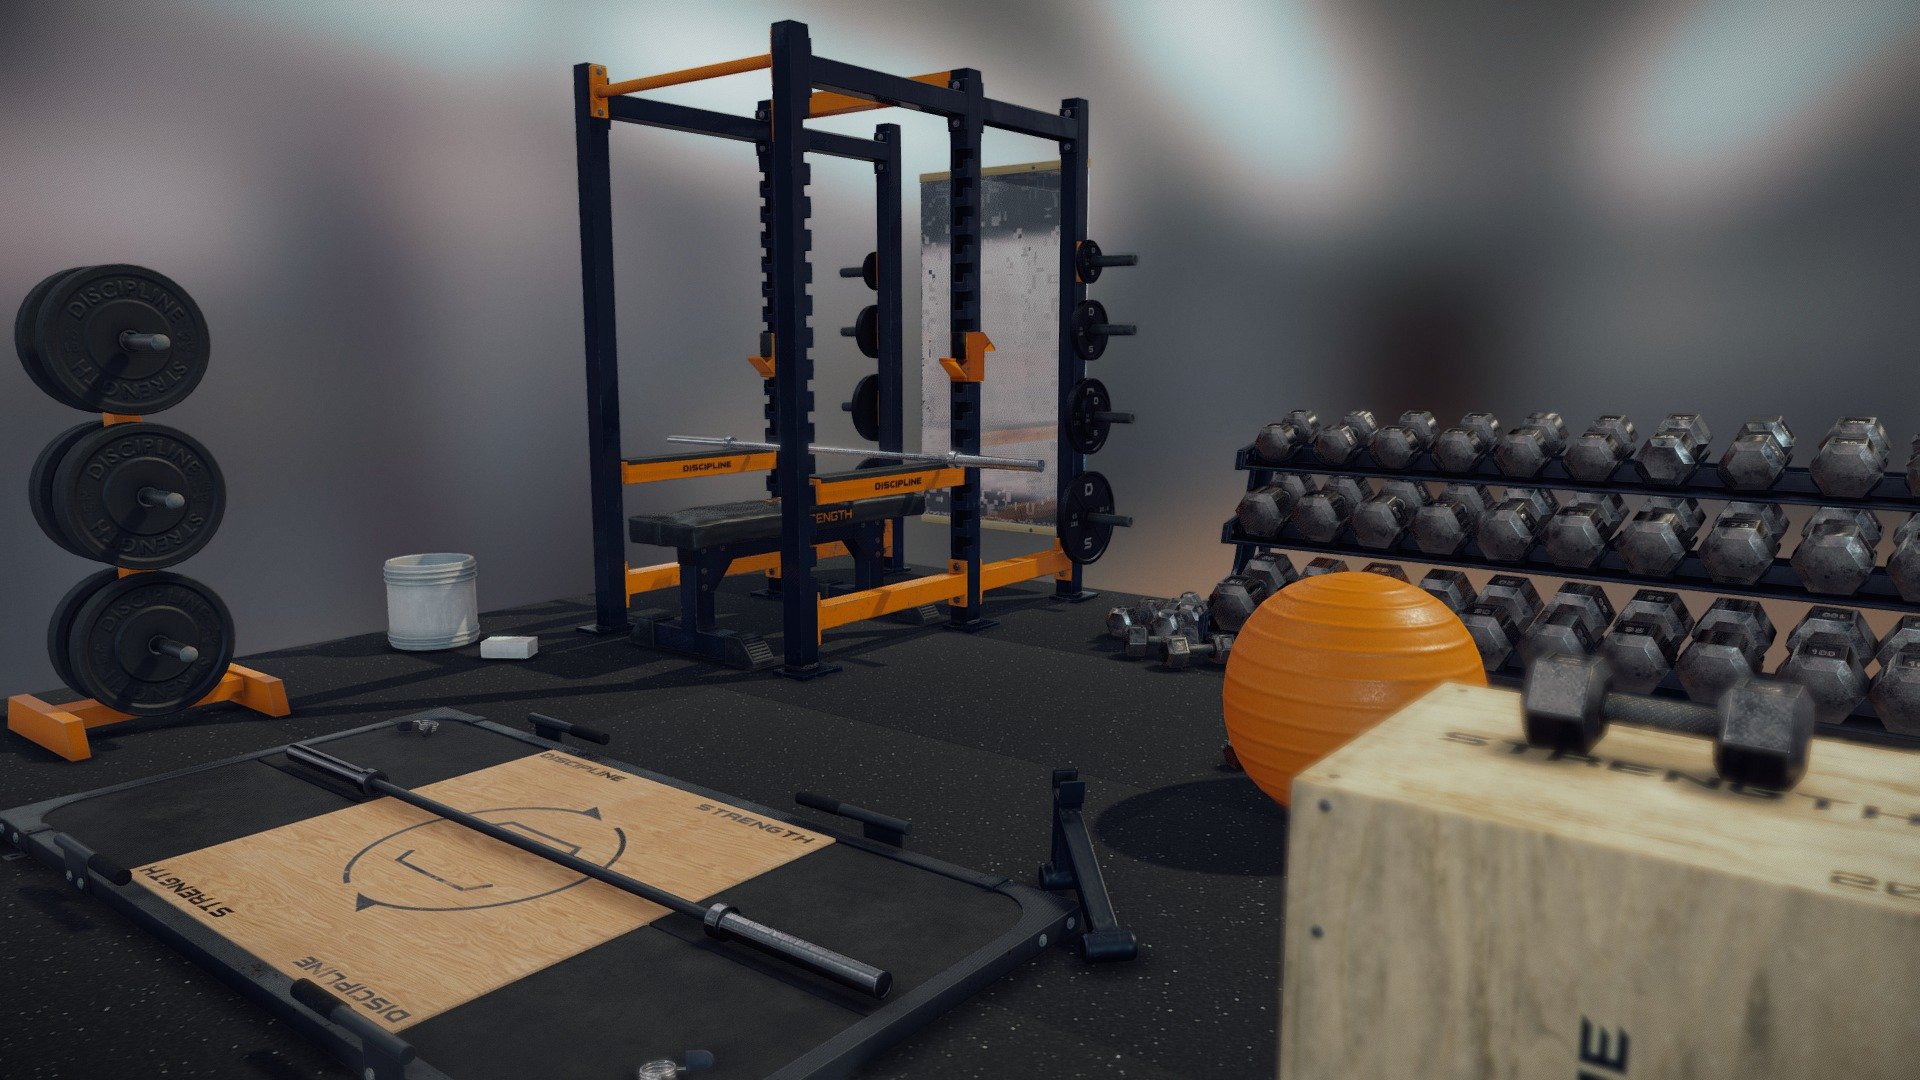 The Essential Weight Lifting Set was built for Epic's Unreal Marketplace, featuring 49 unique props designed to form the core of any gym setting that needs weight lifting equipment. This set is now available on my Sketchfab Store Page for non Unreal Engine Users. 

Please note that the Sketchfab Material count is wrong due to how the scene was composed. The proper number of materials is 12: Dumbbells, Squat Rack, Bumper Plates, Iron Plates, Platform, Barbells, Deco, Dumbbell Numbers (mesh Decal), Plate Holder, Bench (Fat Pad), Rubber Mat, Dumbell Holder). 

Included in the purchase zip file: 
1. Full resolution Textures (2048x2048 and 4096x4096) in .tga format, using a MRA setup.
2. All MASK textures used to drive advanced material processes like wear in a multi channel .tga for applicable assets
3. Individual FBX's for each asset with lightmapped UVs. 

Not Included:
1. Level of Detail Models
2. Collision Models
3. Material Setup (it varies based on the program you use) - The Essential Weight Lifting Set - Buy Royalty Free 3D model by rose3d 3d model